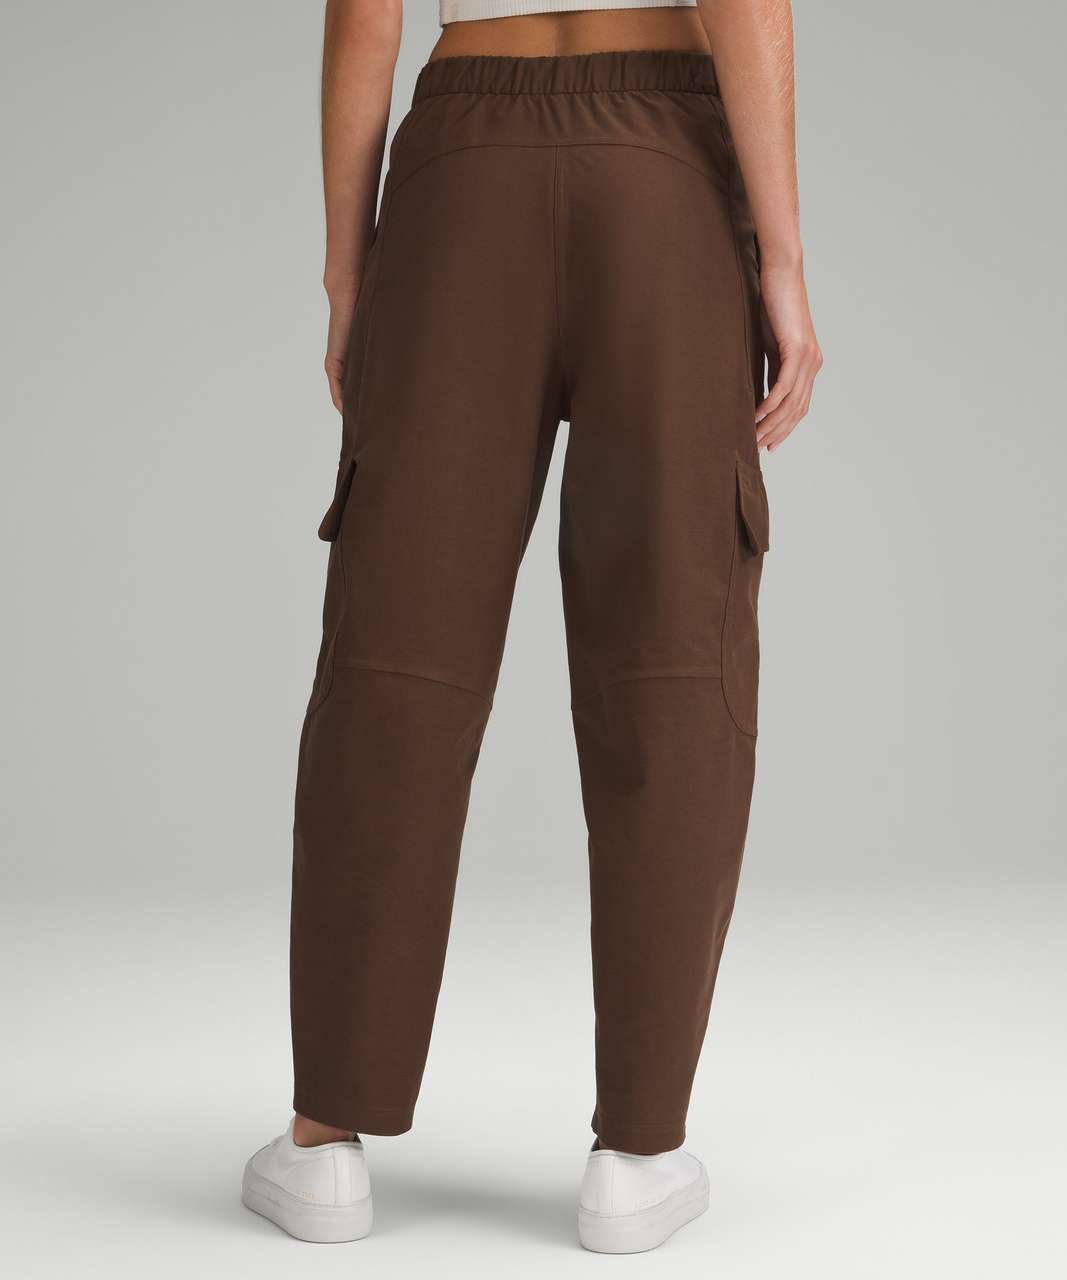 Utilitech cargo pocket high rise pants in roasted brown and